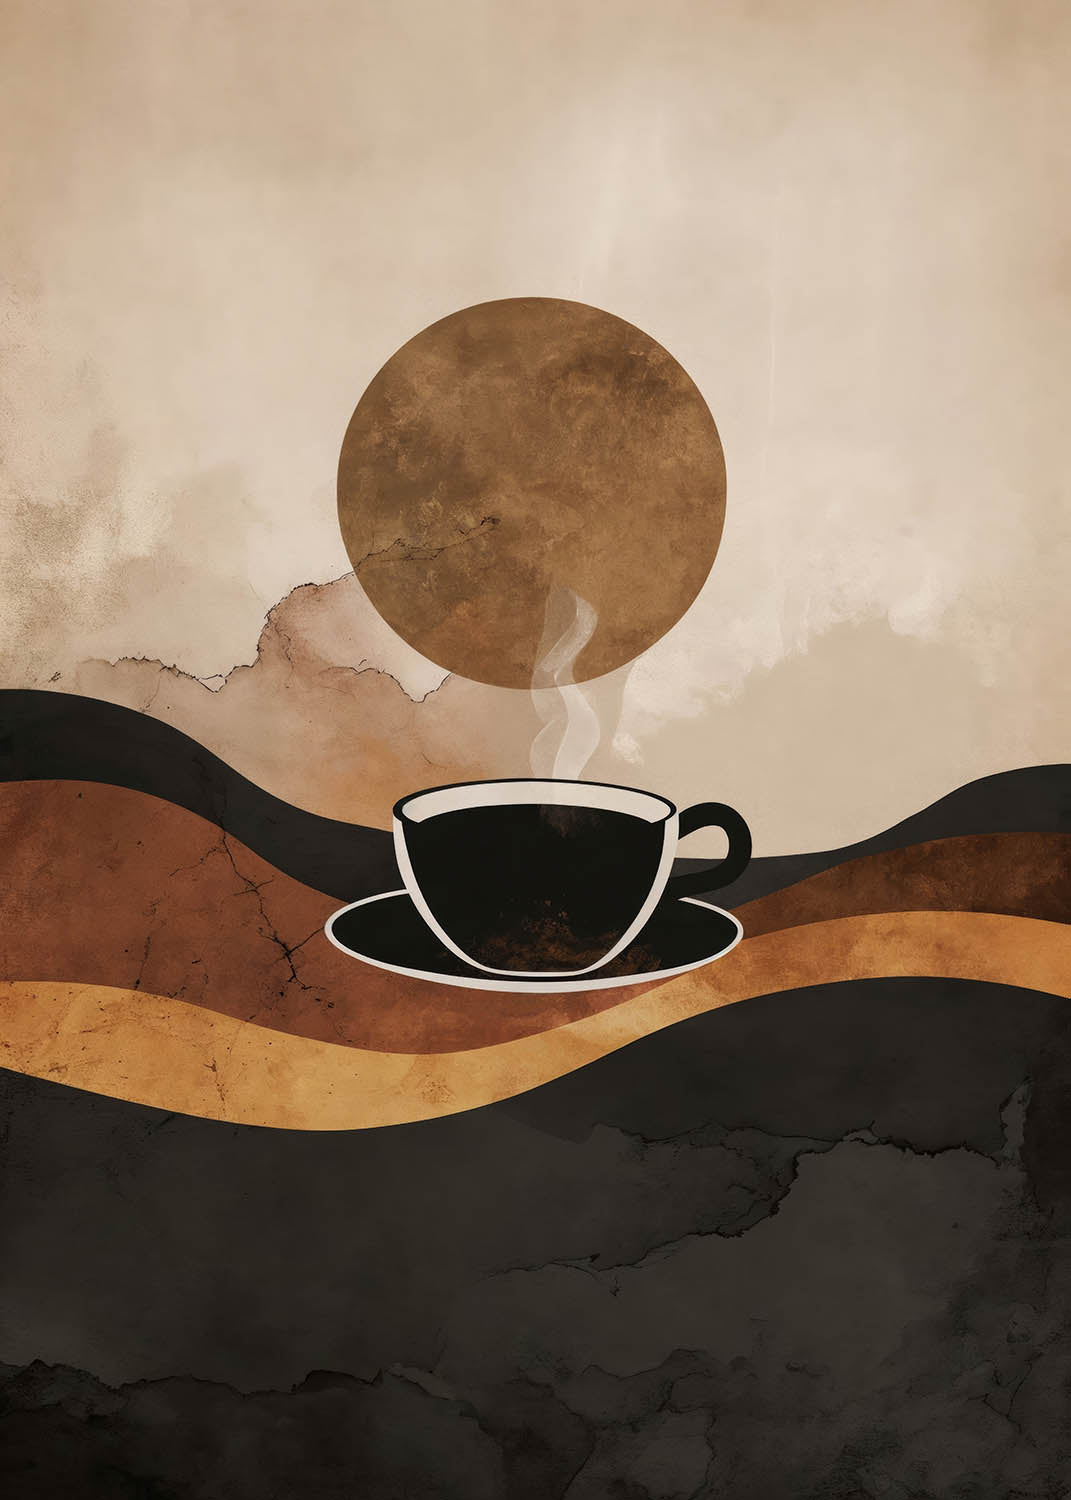 Abstract Coffee Landscape Poster